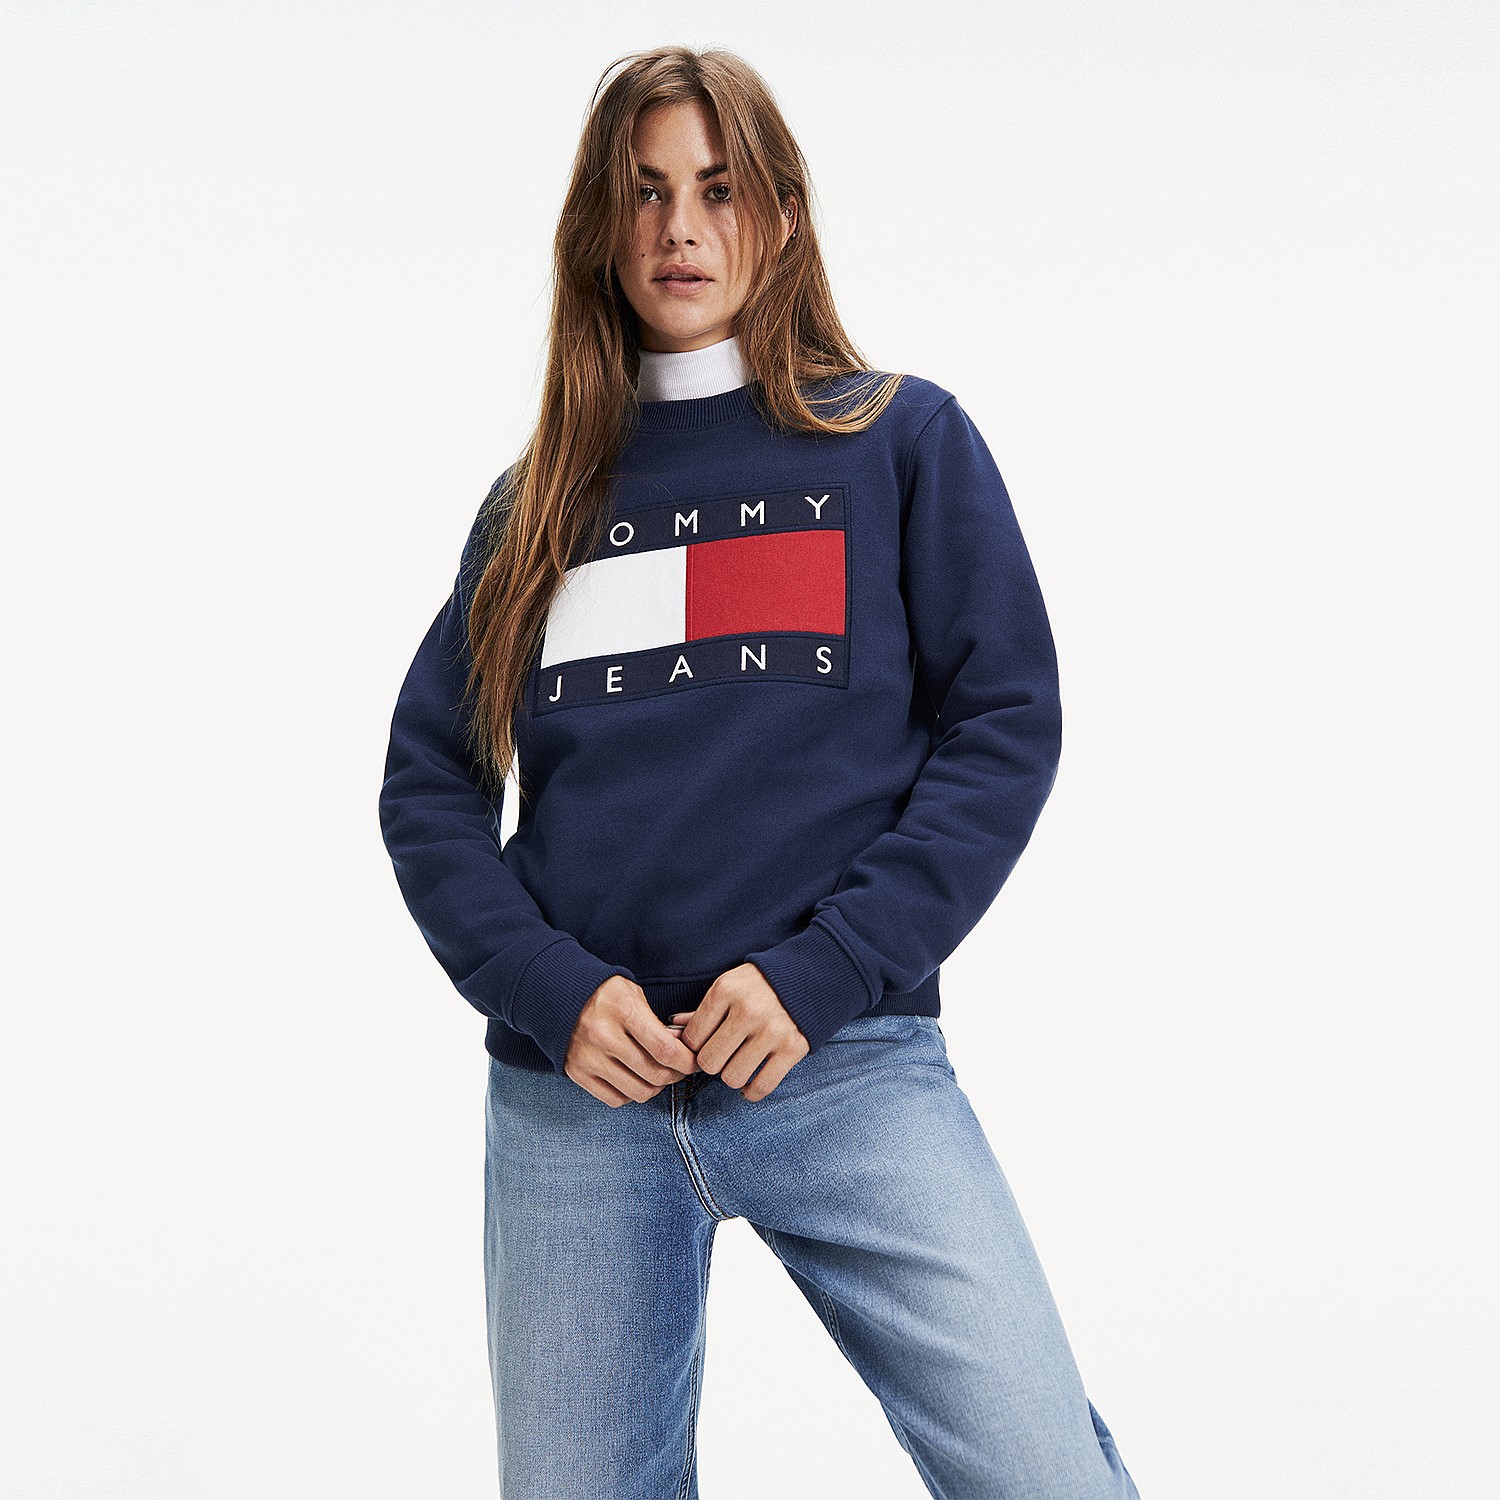 tommy jeans hoodie nz cheap online